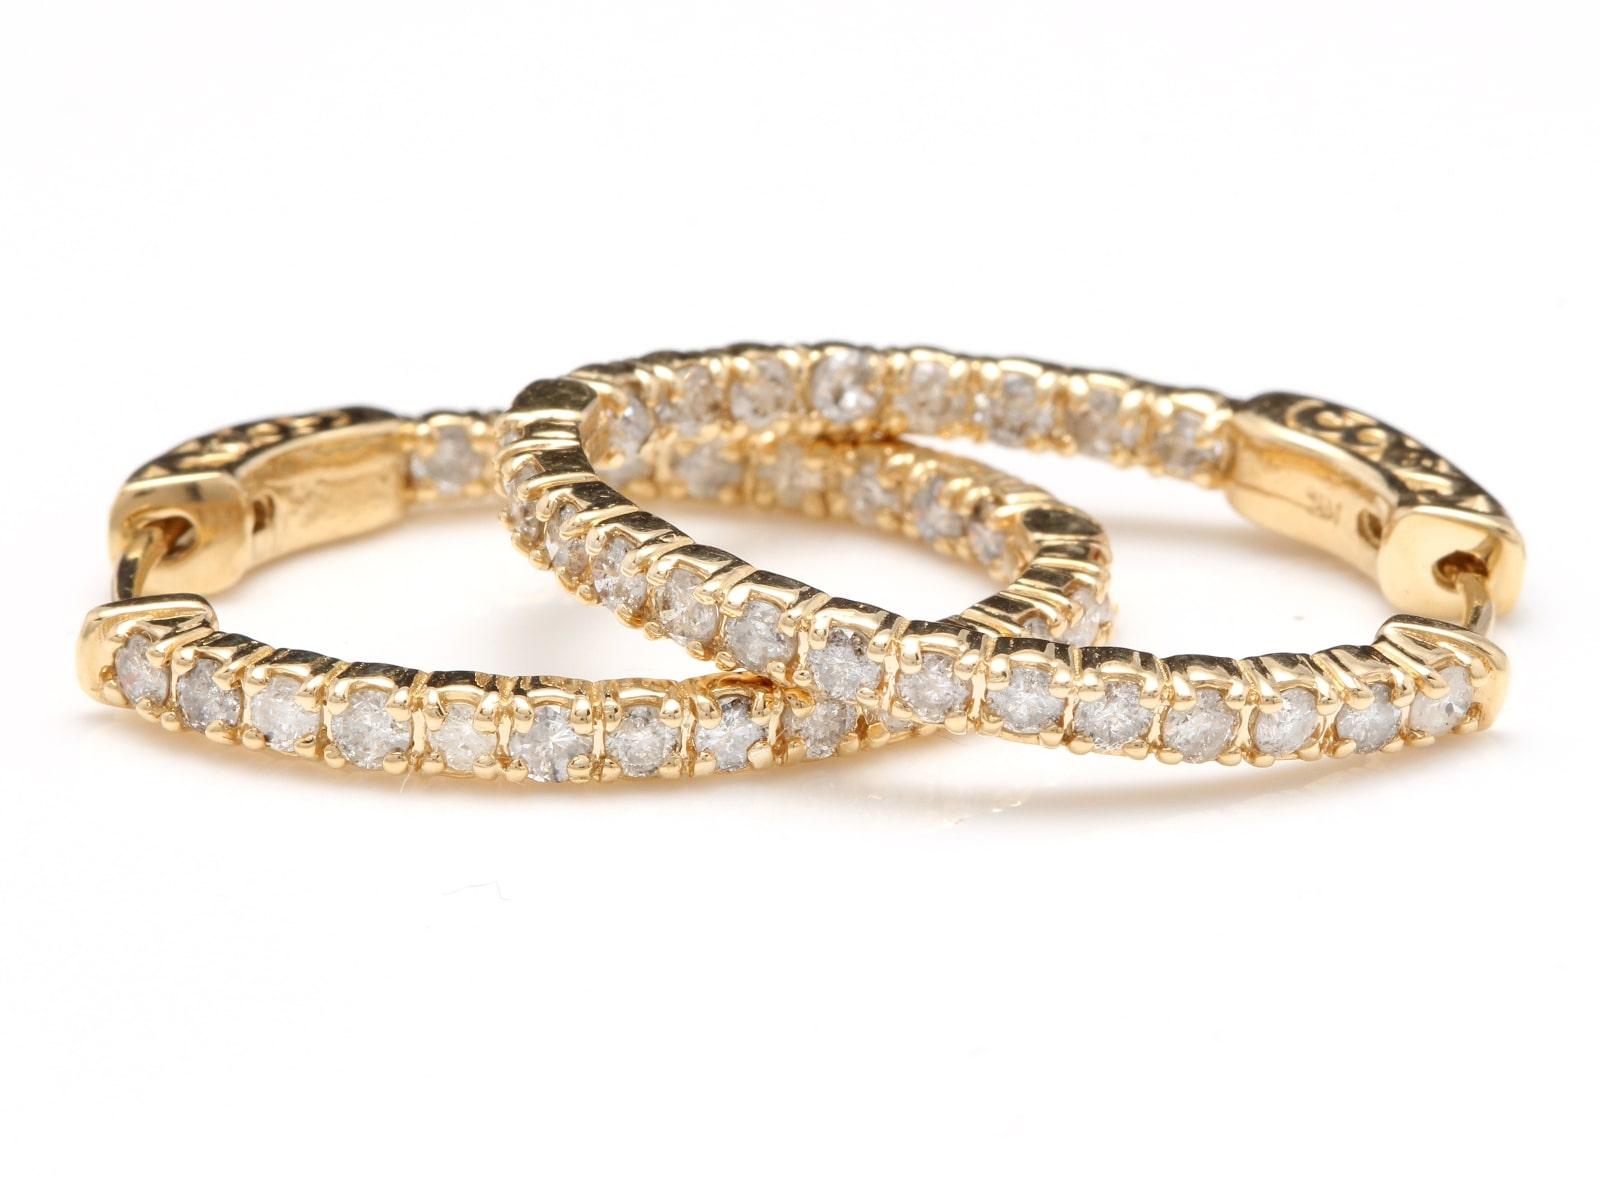 Exquisite 2.25 Carat Natural Diamond 14 Karat Solid Yellow Gold Hoop Earrings In New Condition For Sale In Los Angeles, CA